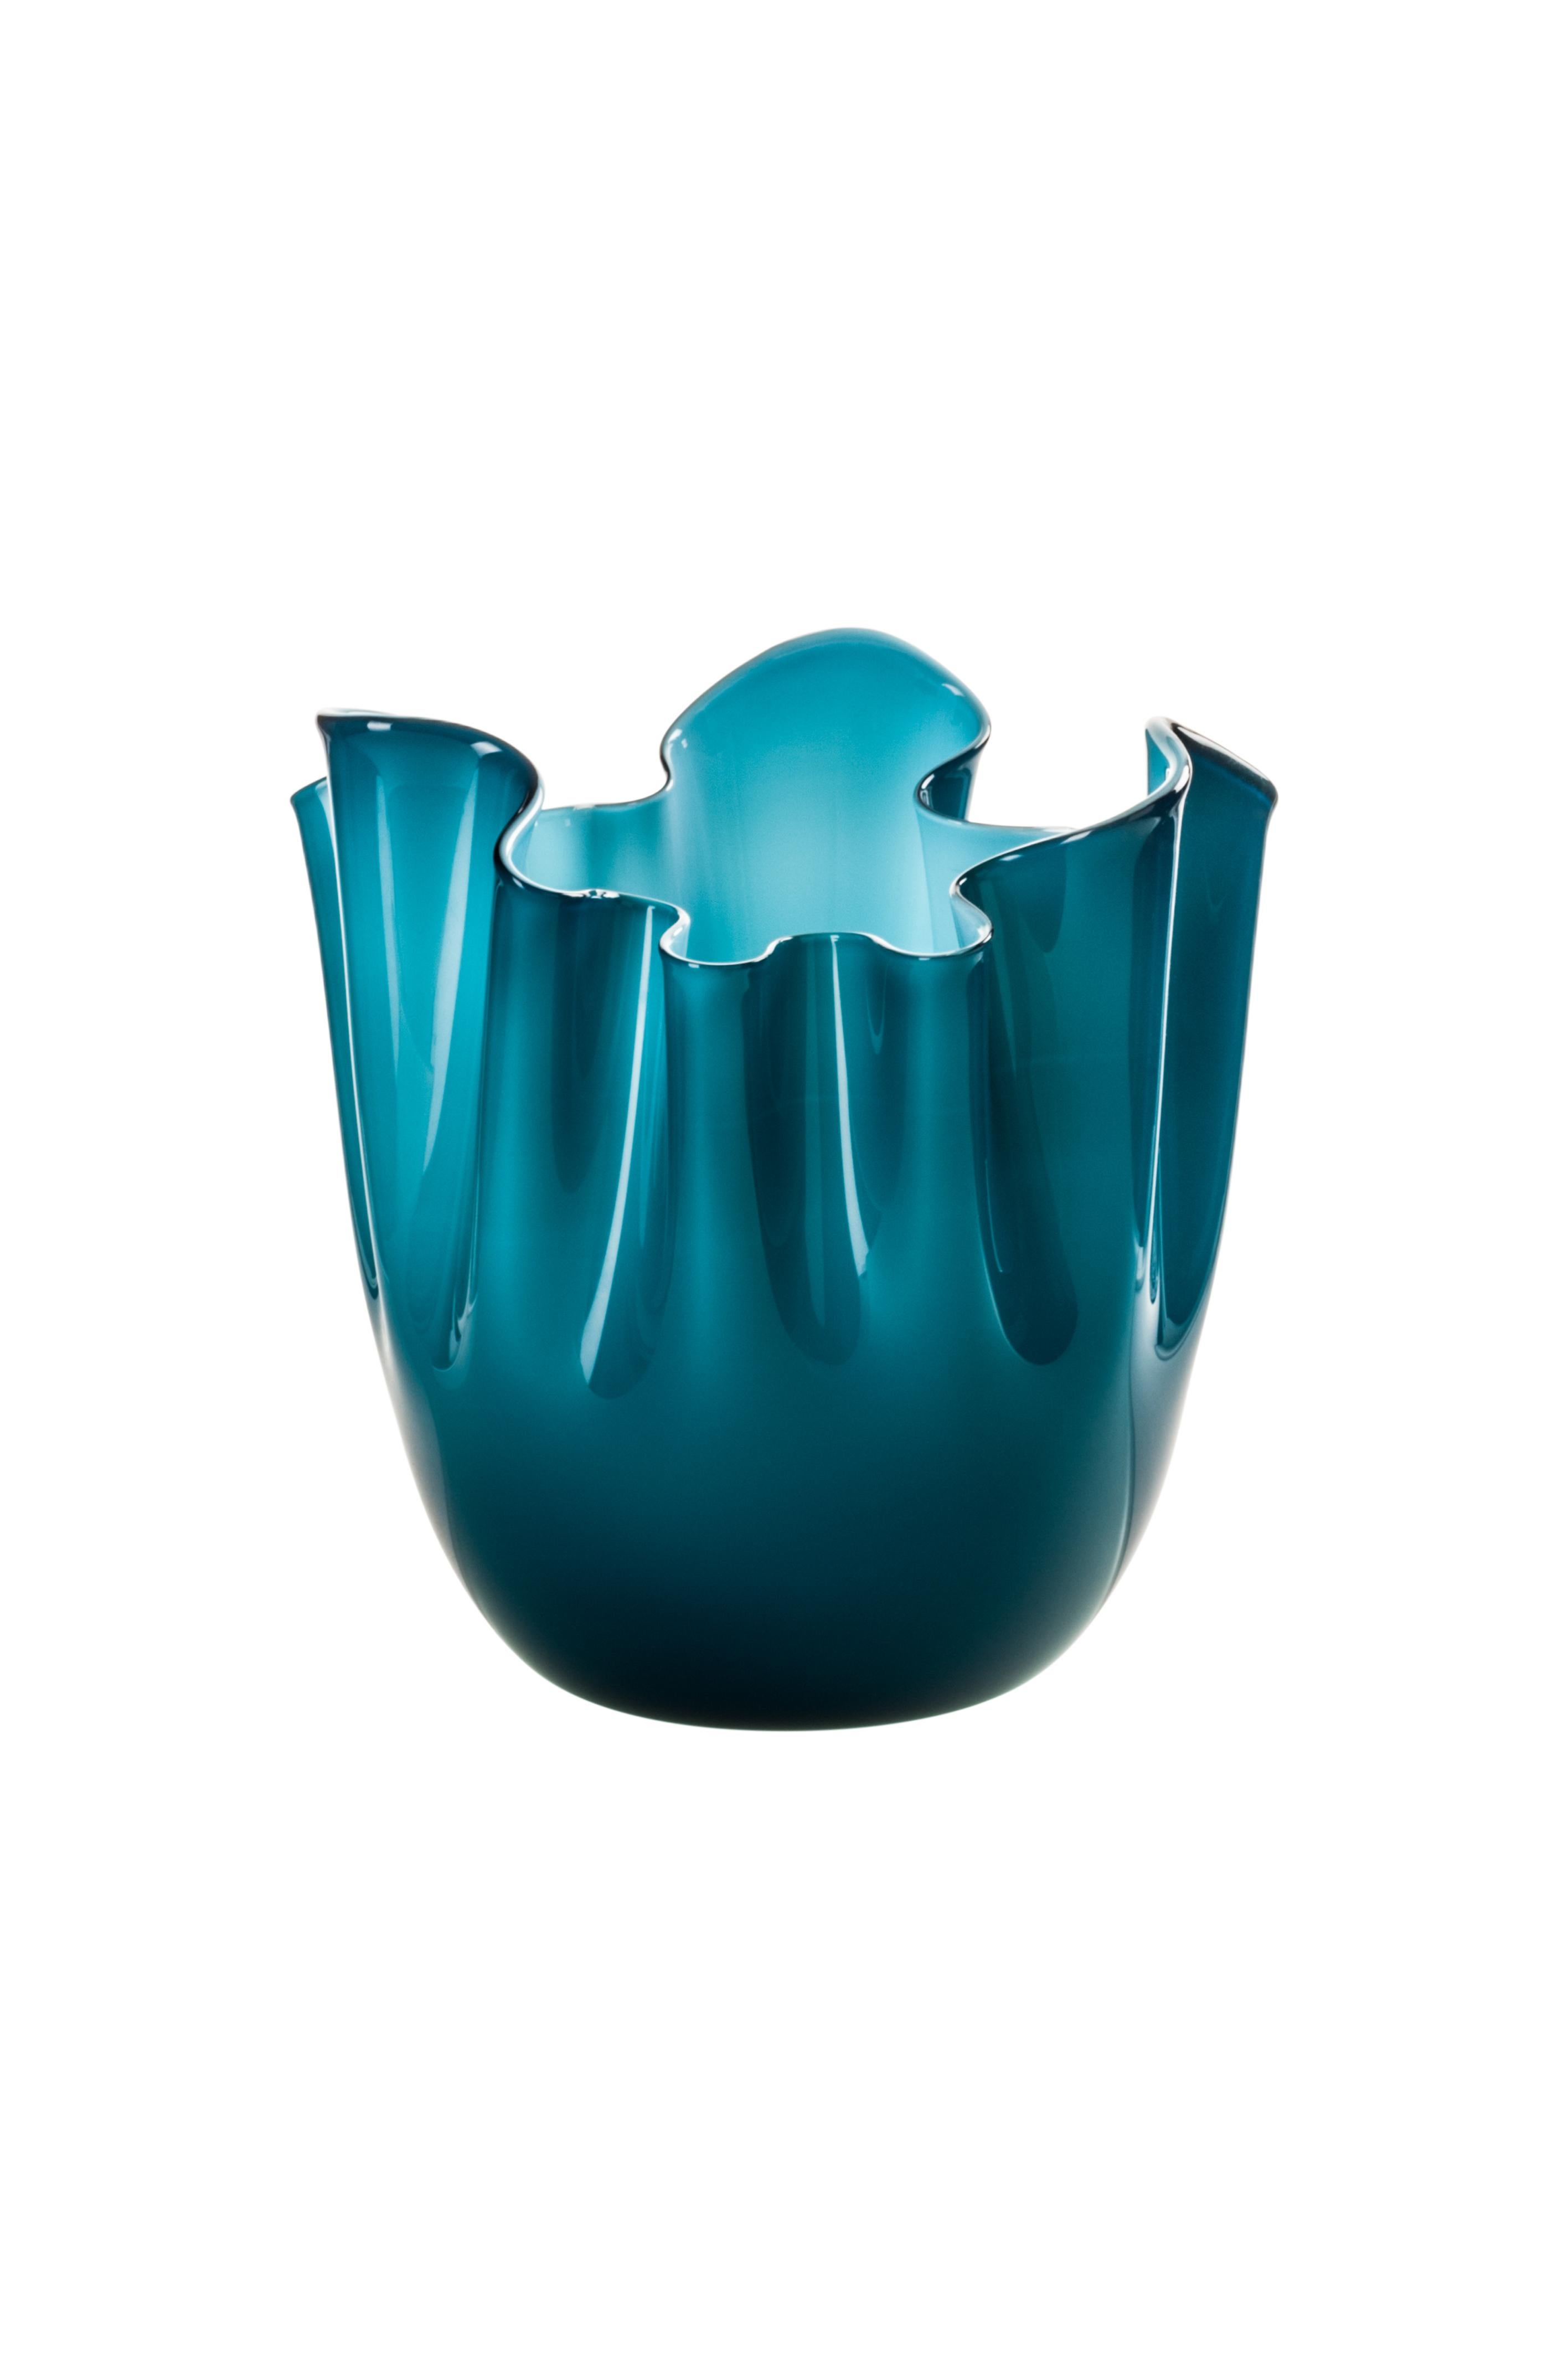 Venini glass vase with pinched rim in aquamarine and mint designed by Fulvio Bianconi and Paolo Venini in 1948. Perfect for indoor home decor as container, vide-poche or statement piece for any room. Also available in other colors on